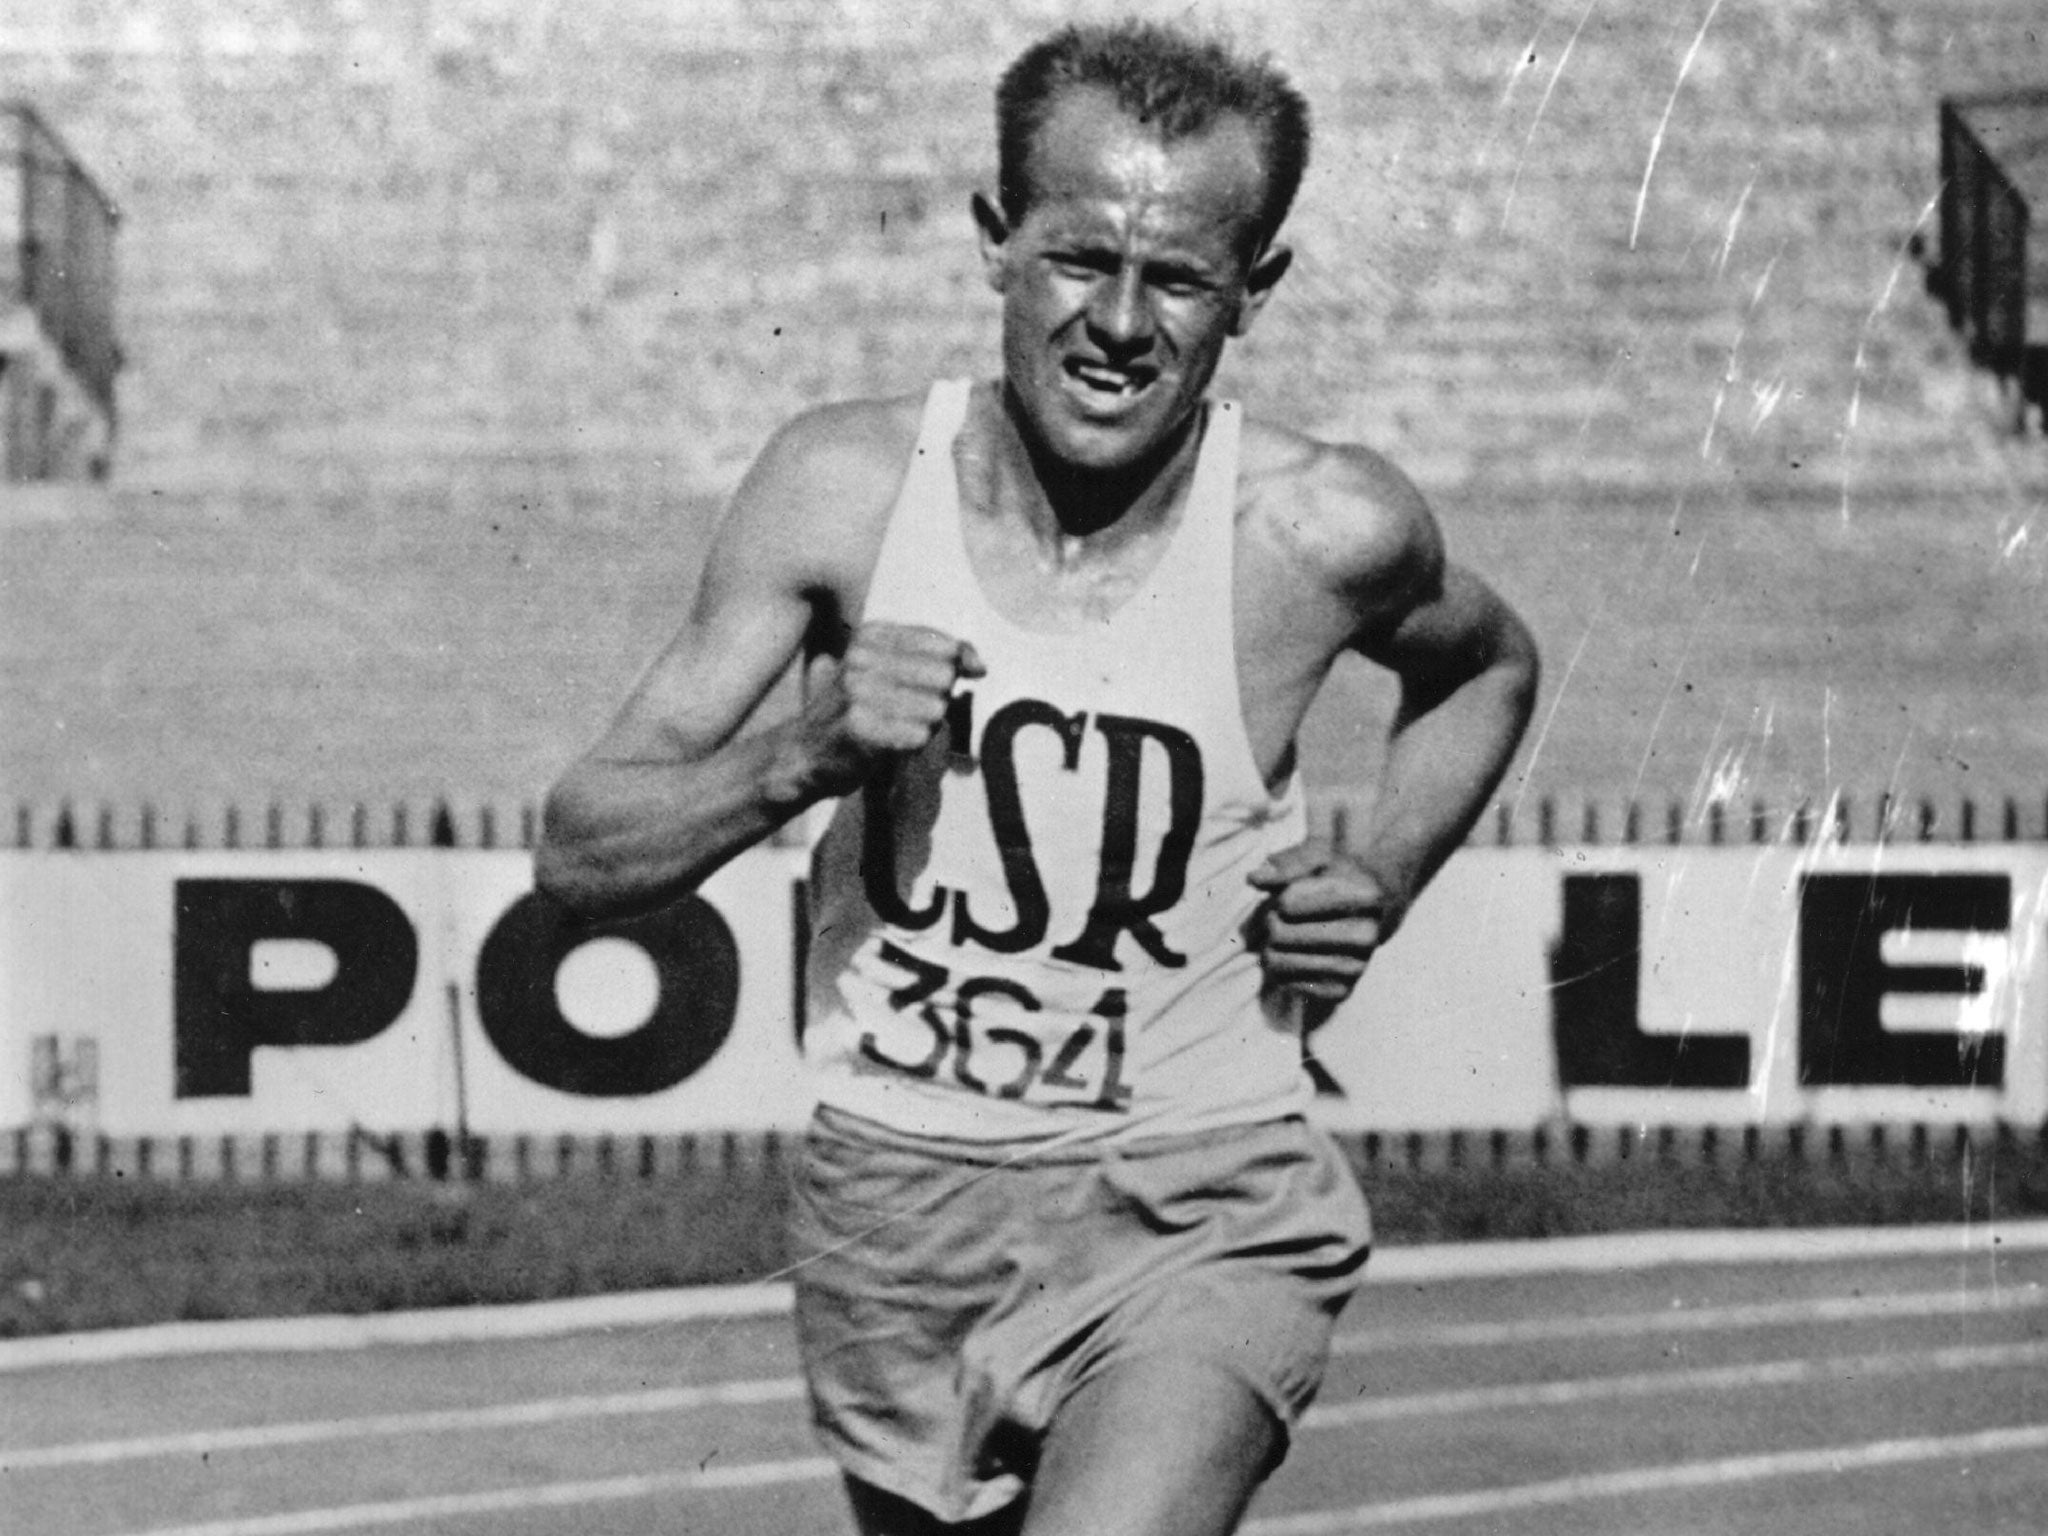 Across the line: Zátopek was worshipped as much for opposing the era’s divisive politics as for his sporting achievements